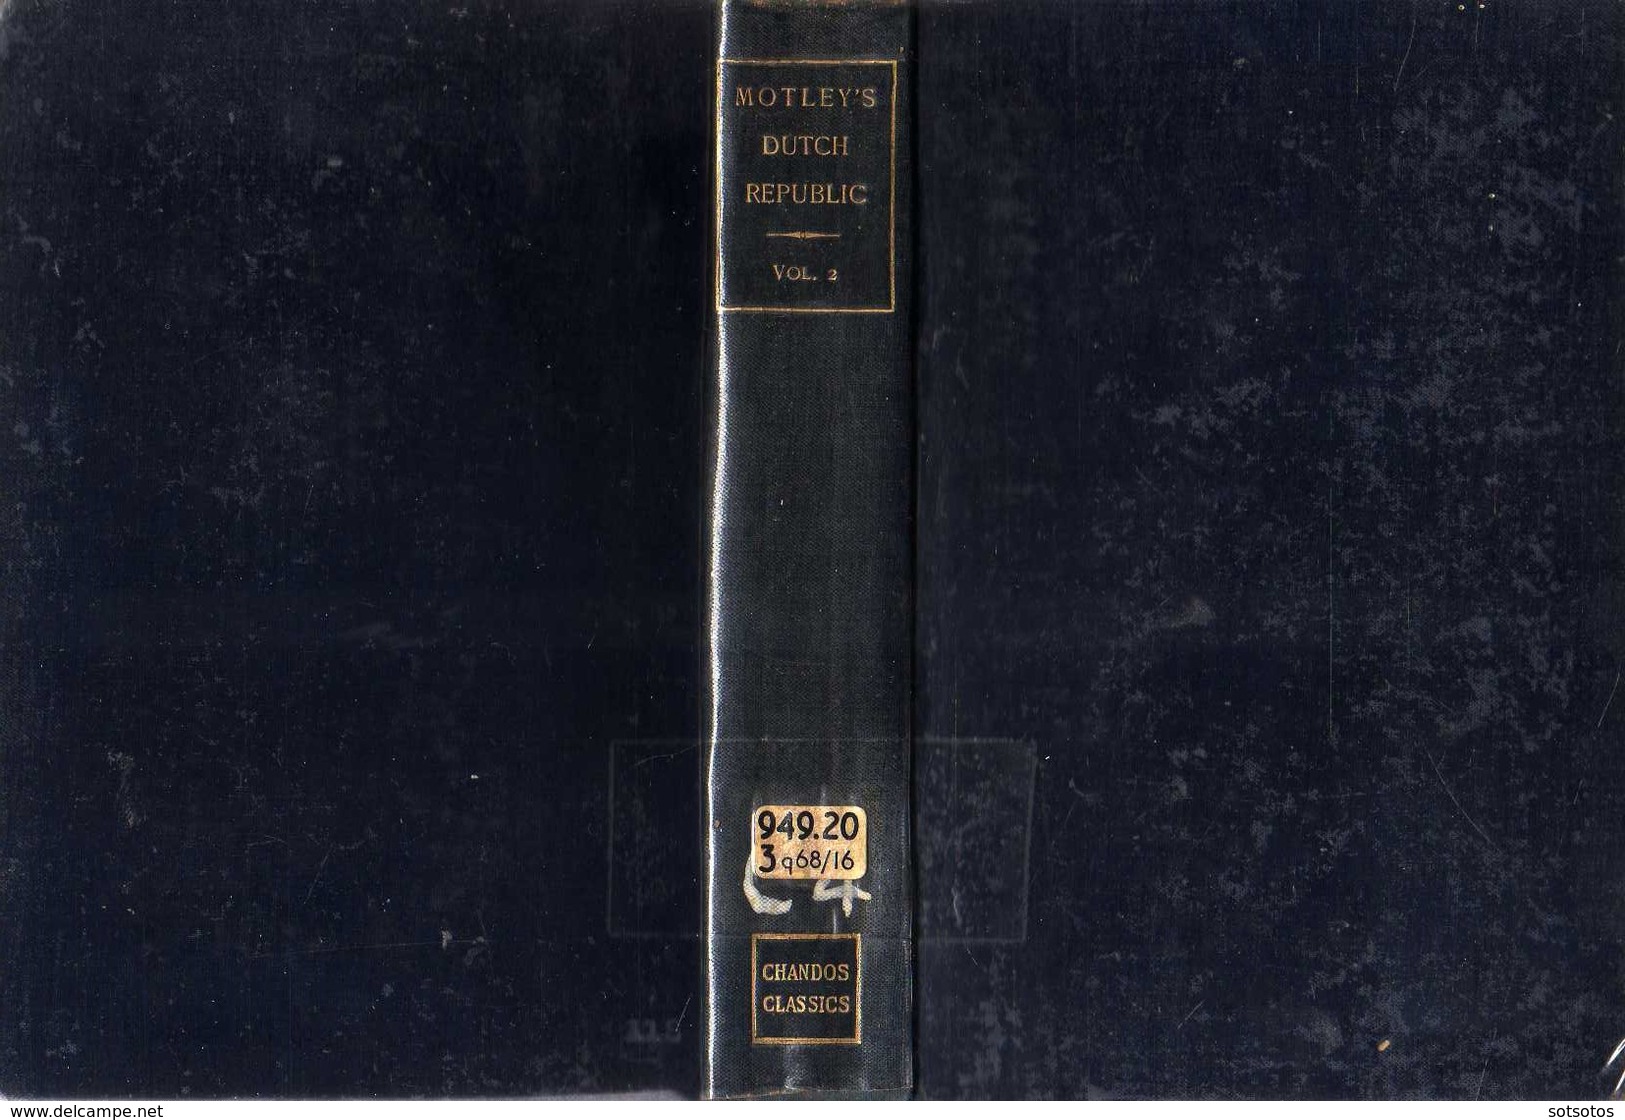 The RISE Of The DUTCH REPUBLIC Vol. II: J. LOTHROP MOTLEY And A.J. MANSFIELD, Ed. Fr. WARNE (1902?), 572 Pages, Good Con - Antigua